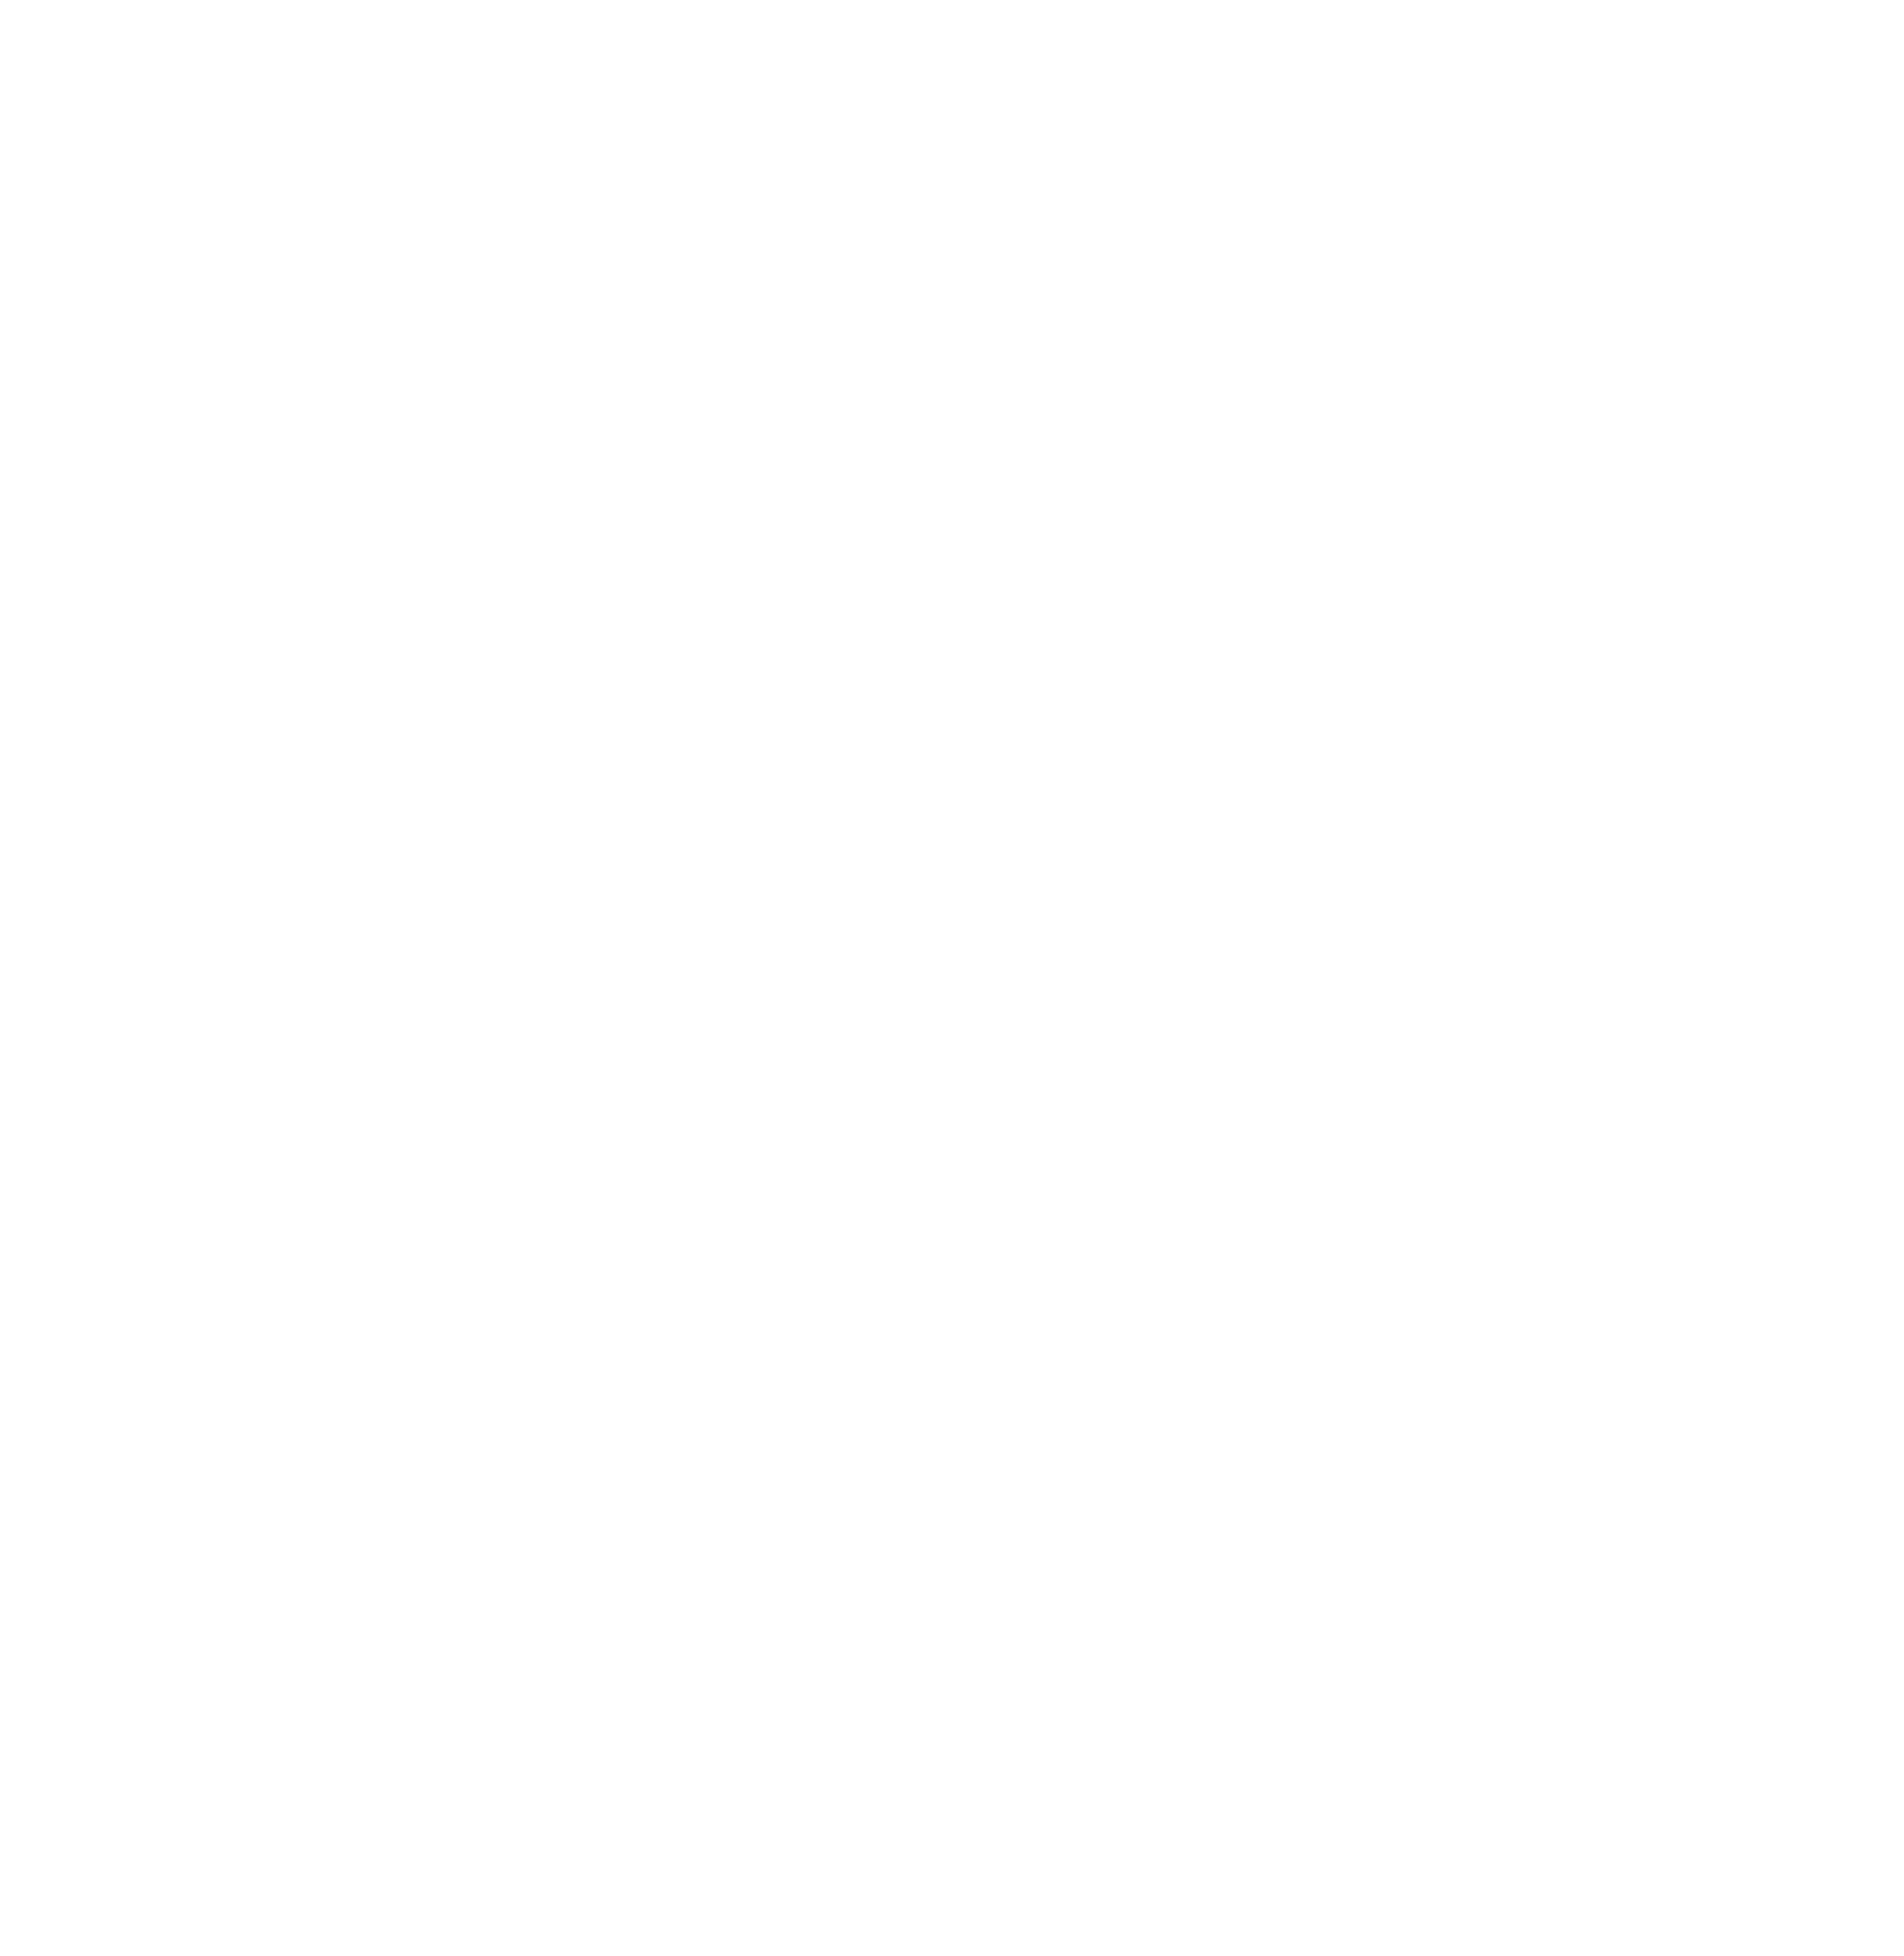 Dollar bill with arrow pointing to car